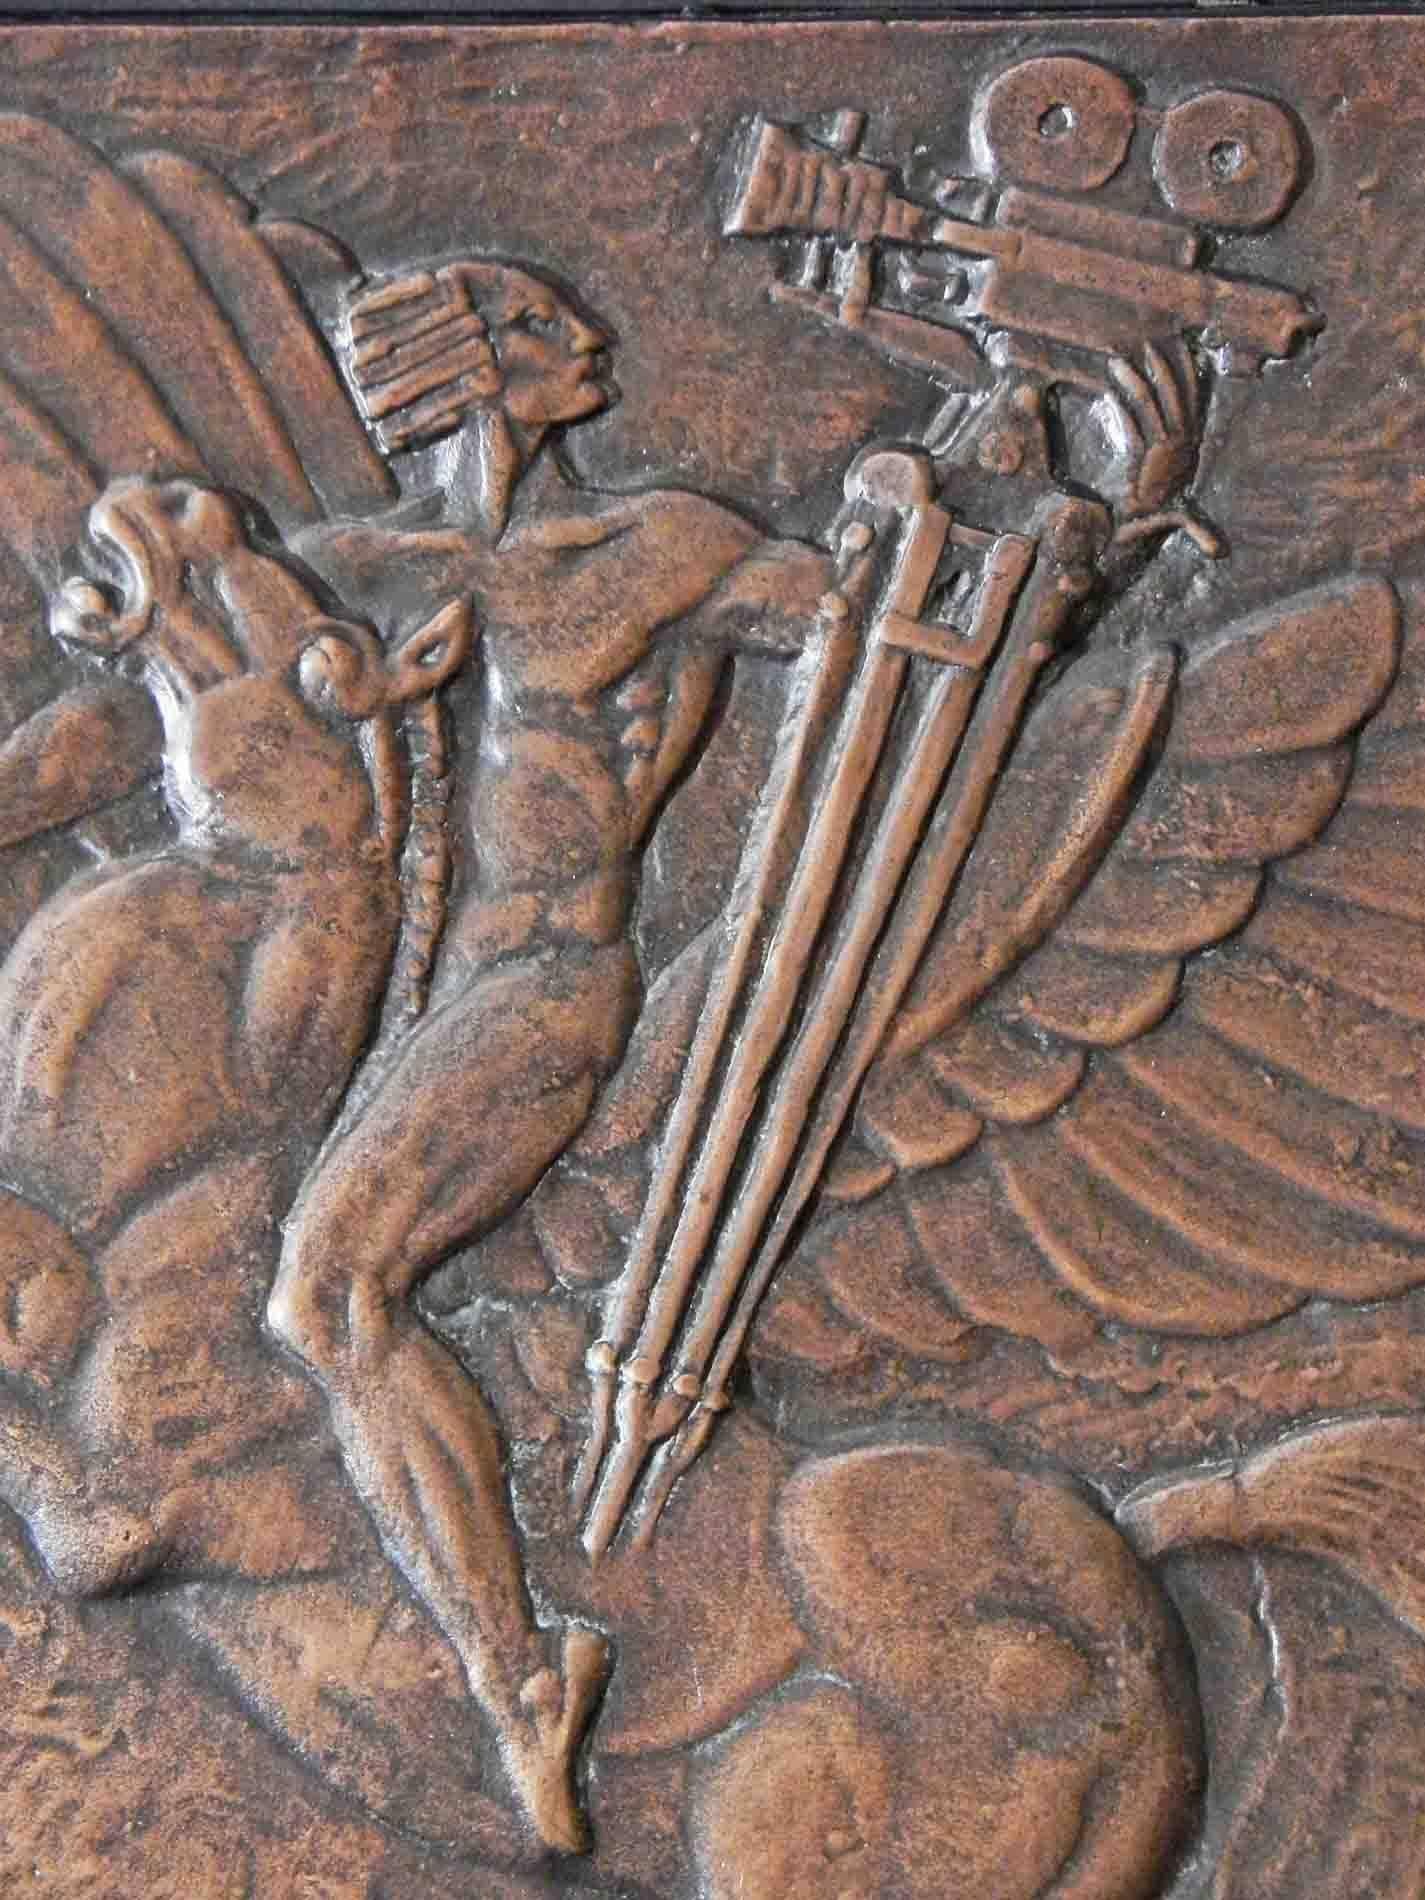 Clearly an allegorical expression of the rise of American cinema, this fabulous and rare bronze panel depicts a nude American Indian figure carrying a modern movie camera, riding Pegasus, the winged horse, with the modern city skyline below. The